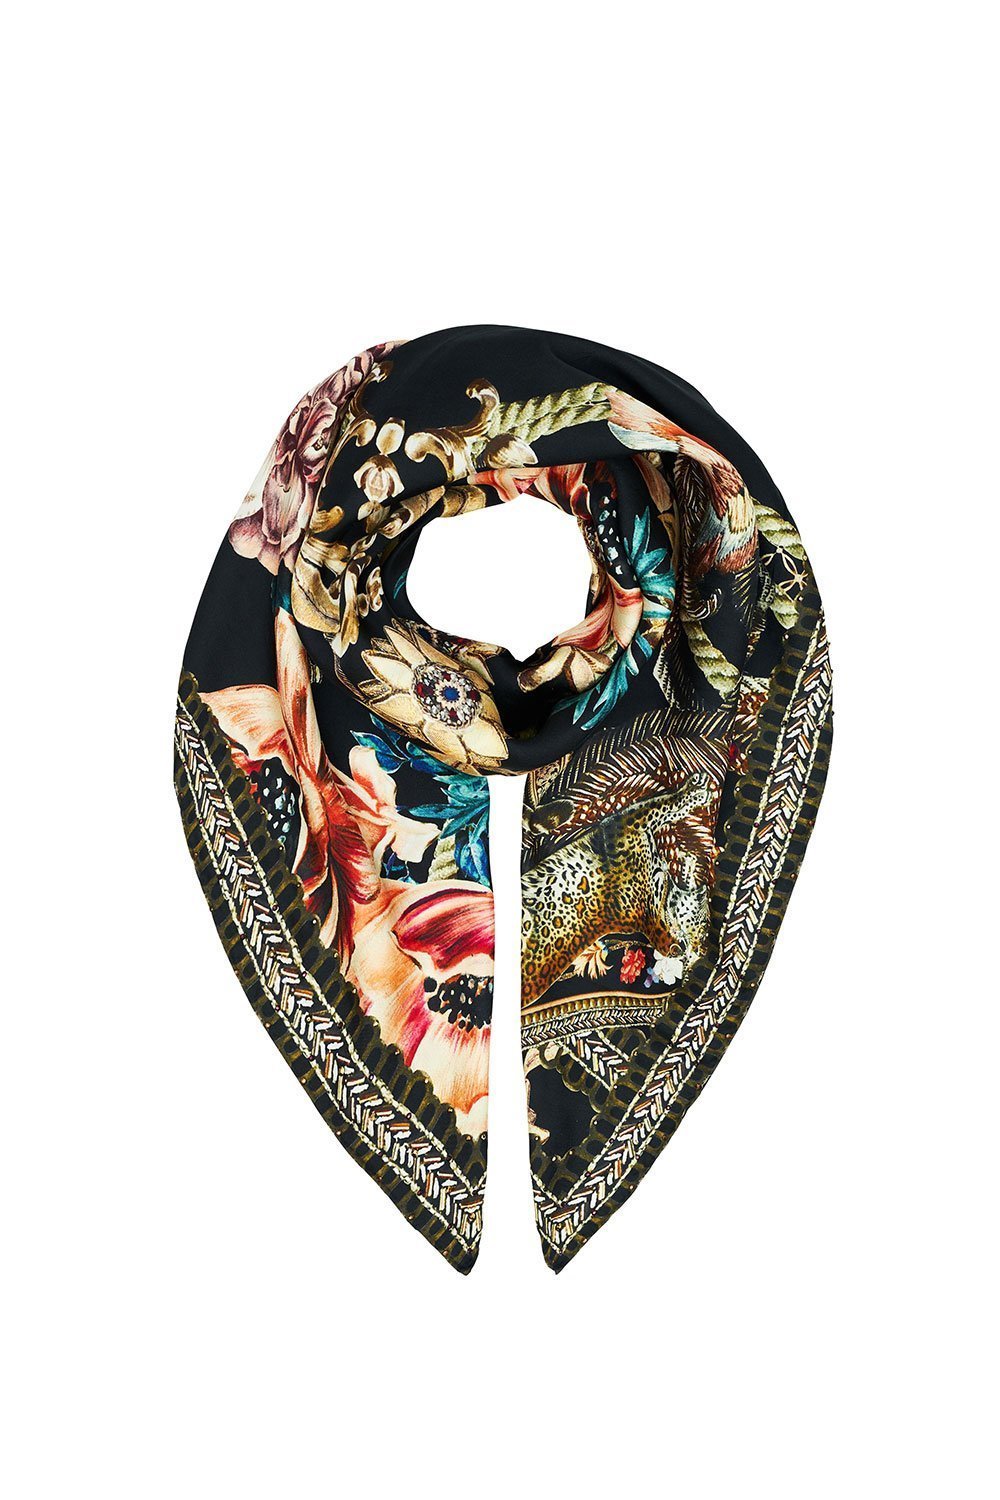 LARGE SQUARE SCARF BELLE OF THE BAROQUE